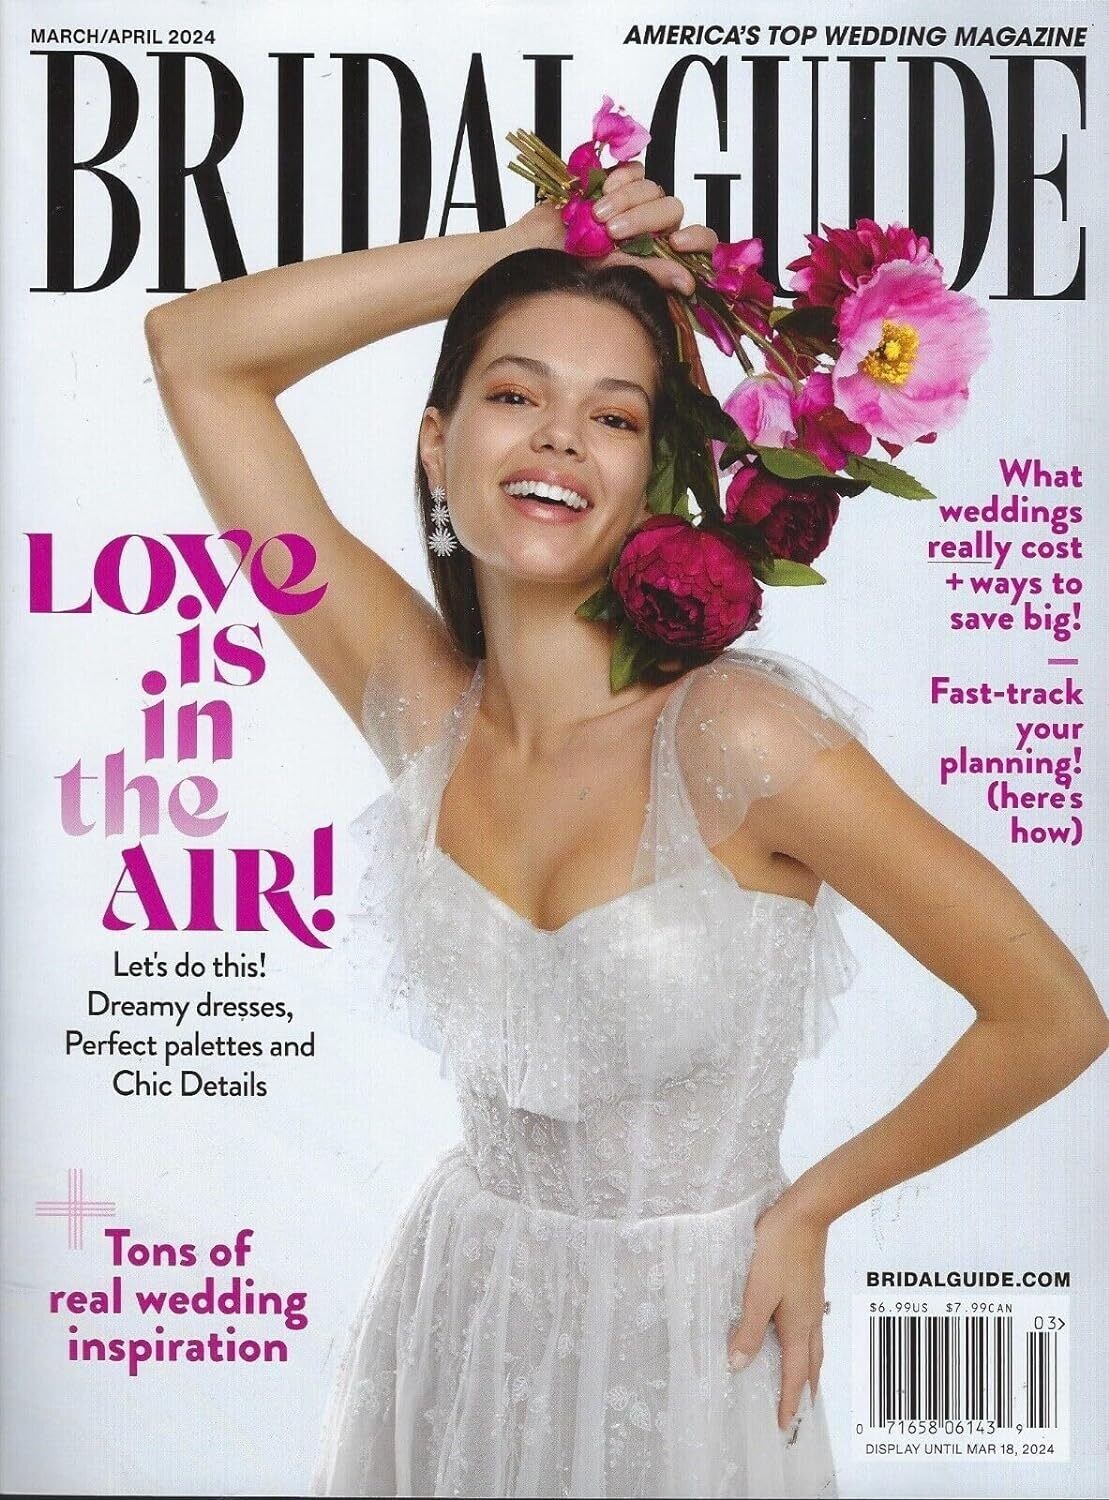 Bridal Guide Magazine Mar/April 2024 Love is in the air